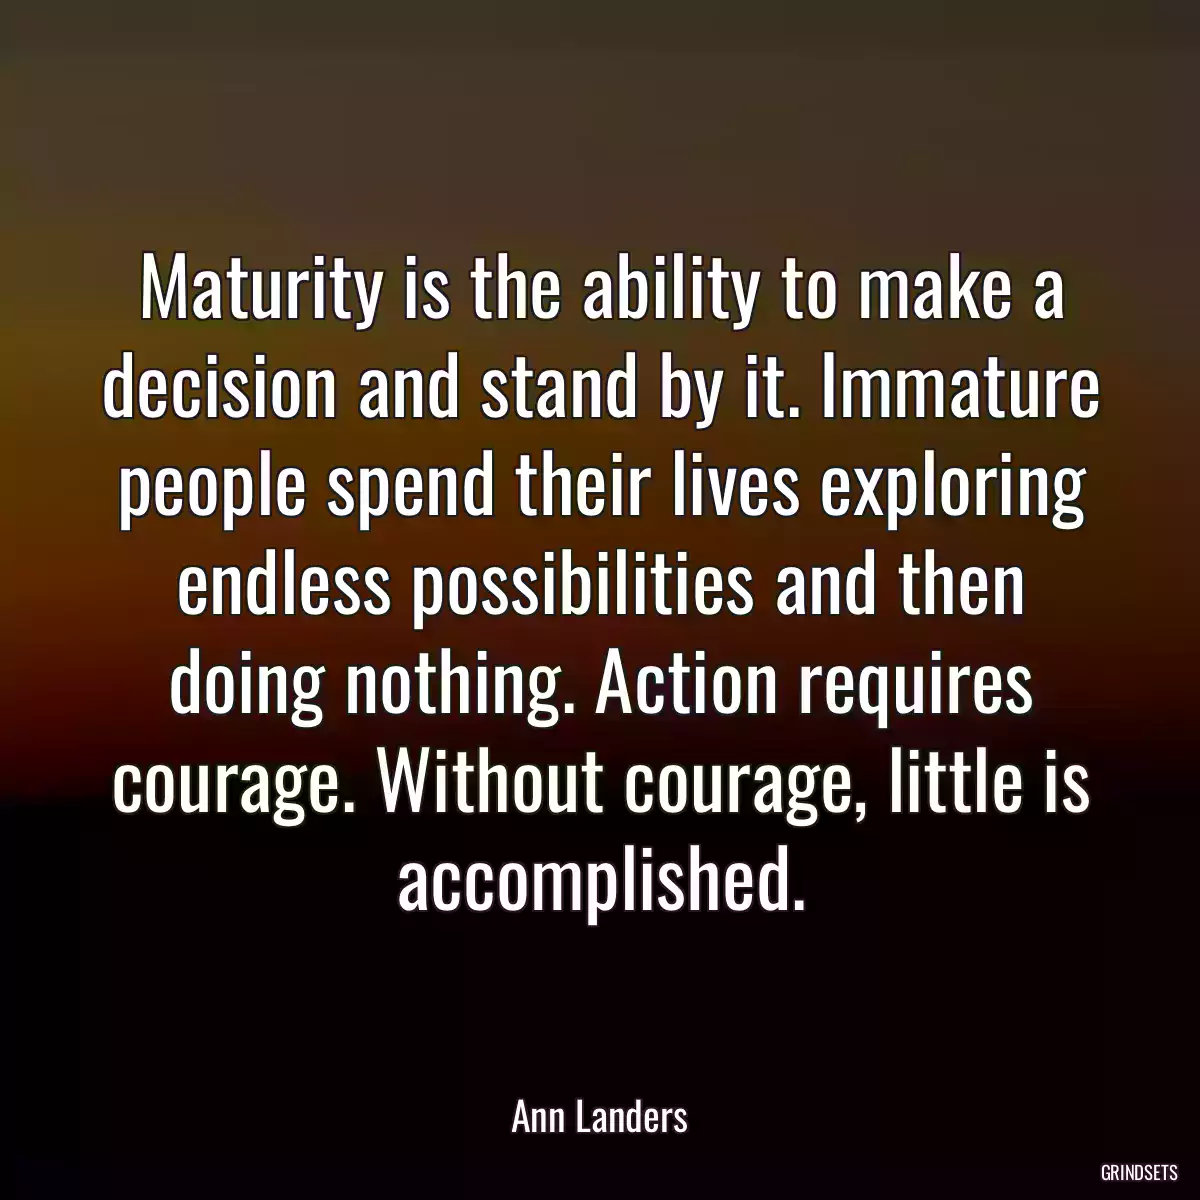 Maturity is the ability to make a decision and stand by it. Immature people spend their lives exploring endless possibilities and then doing nothing. Action requires courage. Without courage, little is accomplished.